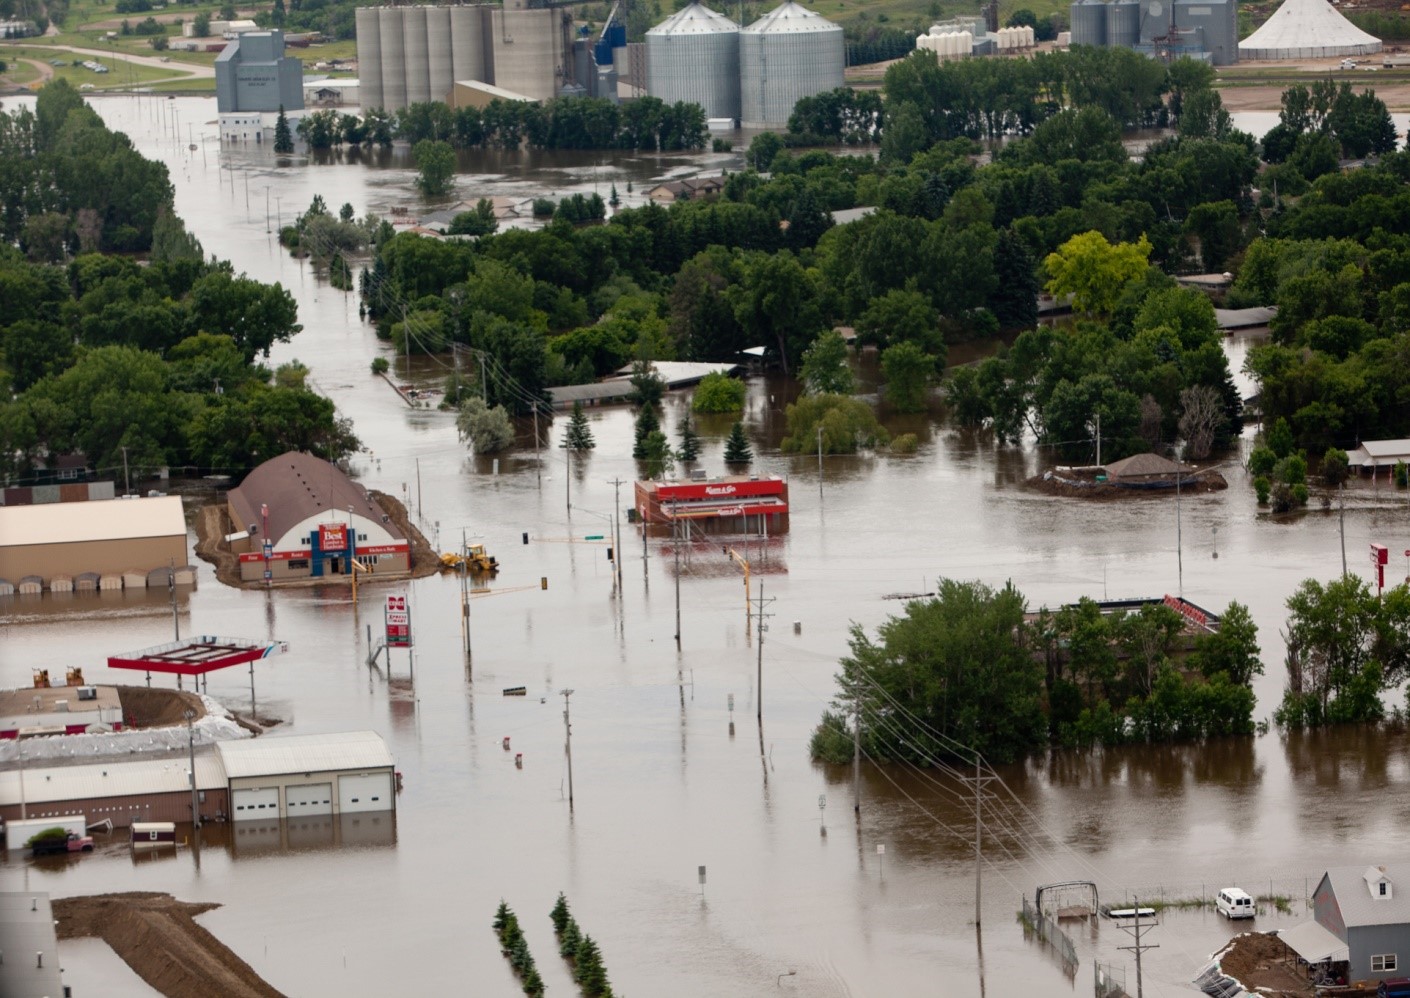 The 2011 Souris River flood, including communities like Burlington, North Dakota, has led to a new IJC study on ways to limit damages in the future. Credit: FEMA